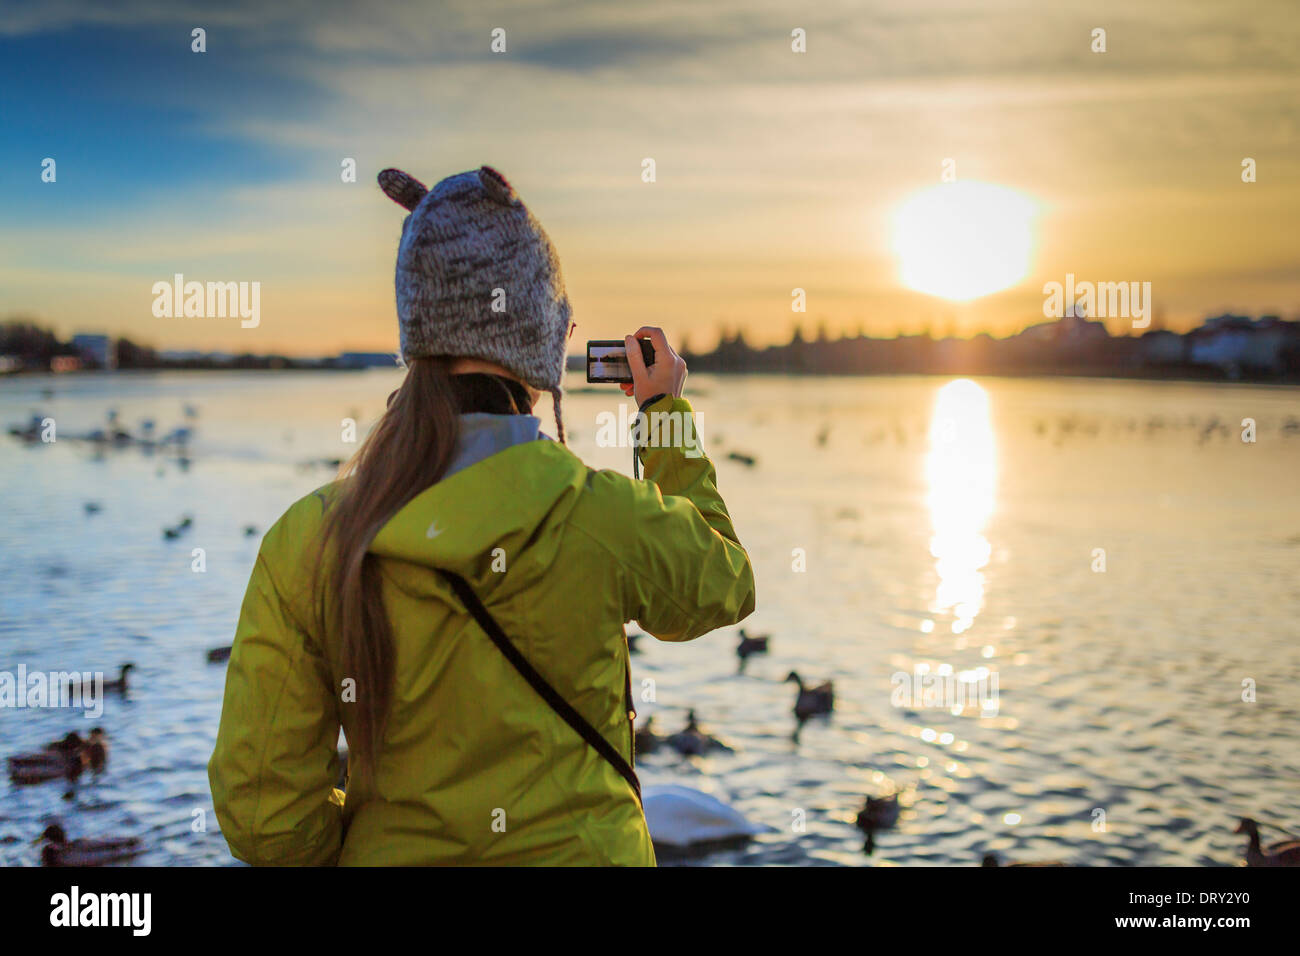 Watching the winter sunset at The Pond in Reykjavik, Iceland Stock Photo